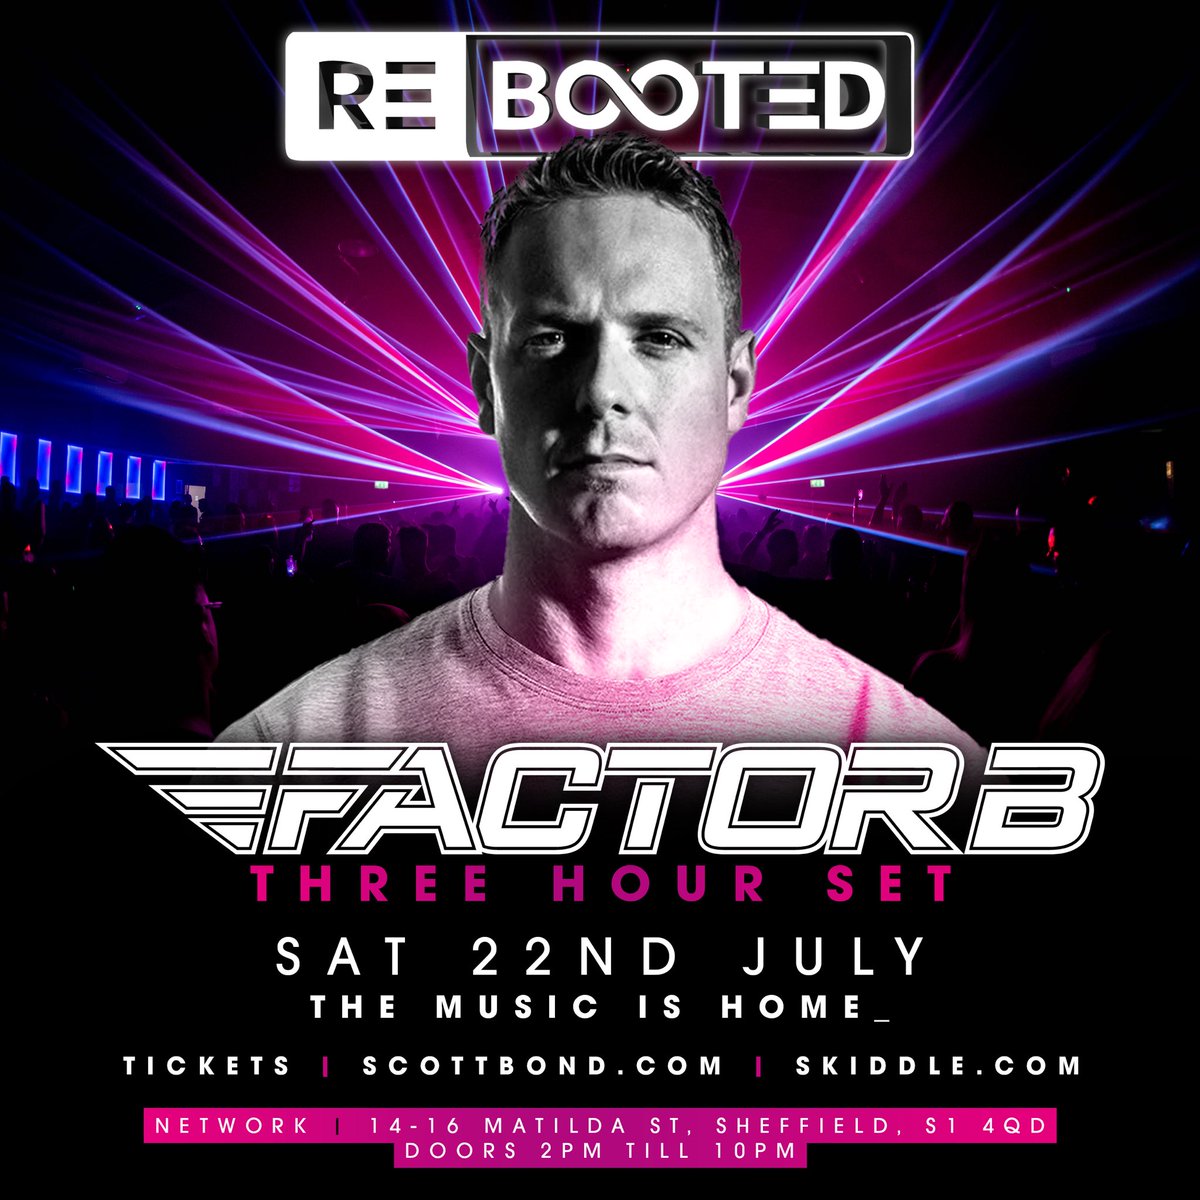 This is #REBOOTED Trance Made in Sheffield. Tickets Now Released bit.ly/GetREBOOTEDtix first #headliner announced @Factor_B_Music 3 hour set!🥇🎼 #trance #themusicishome